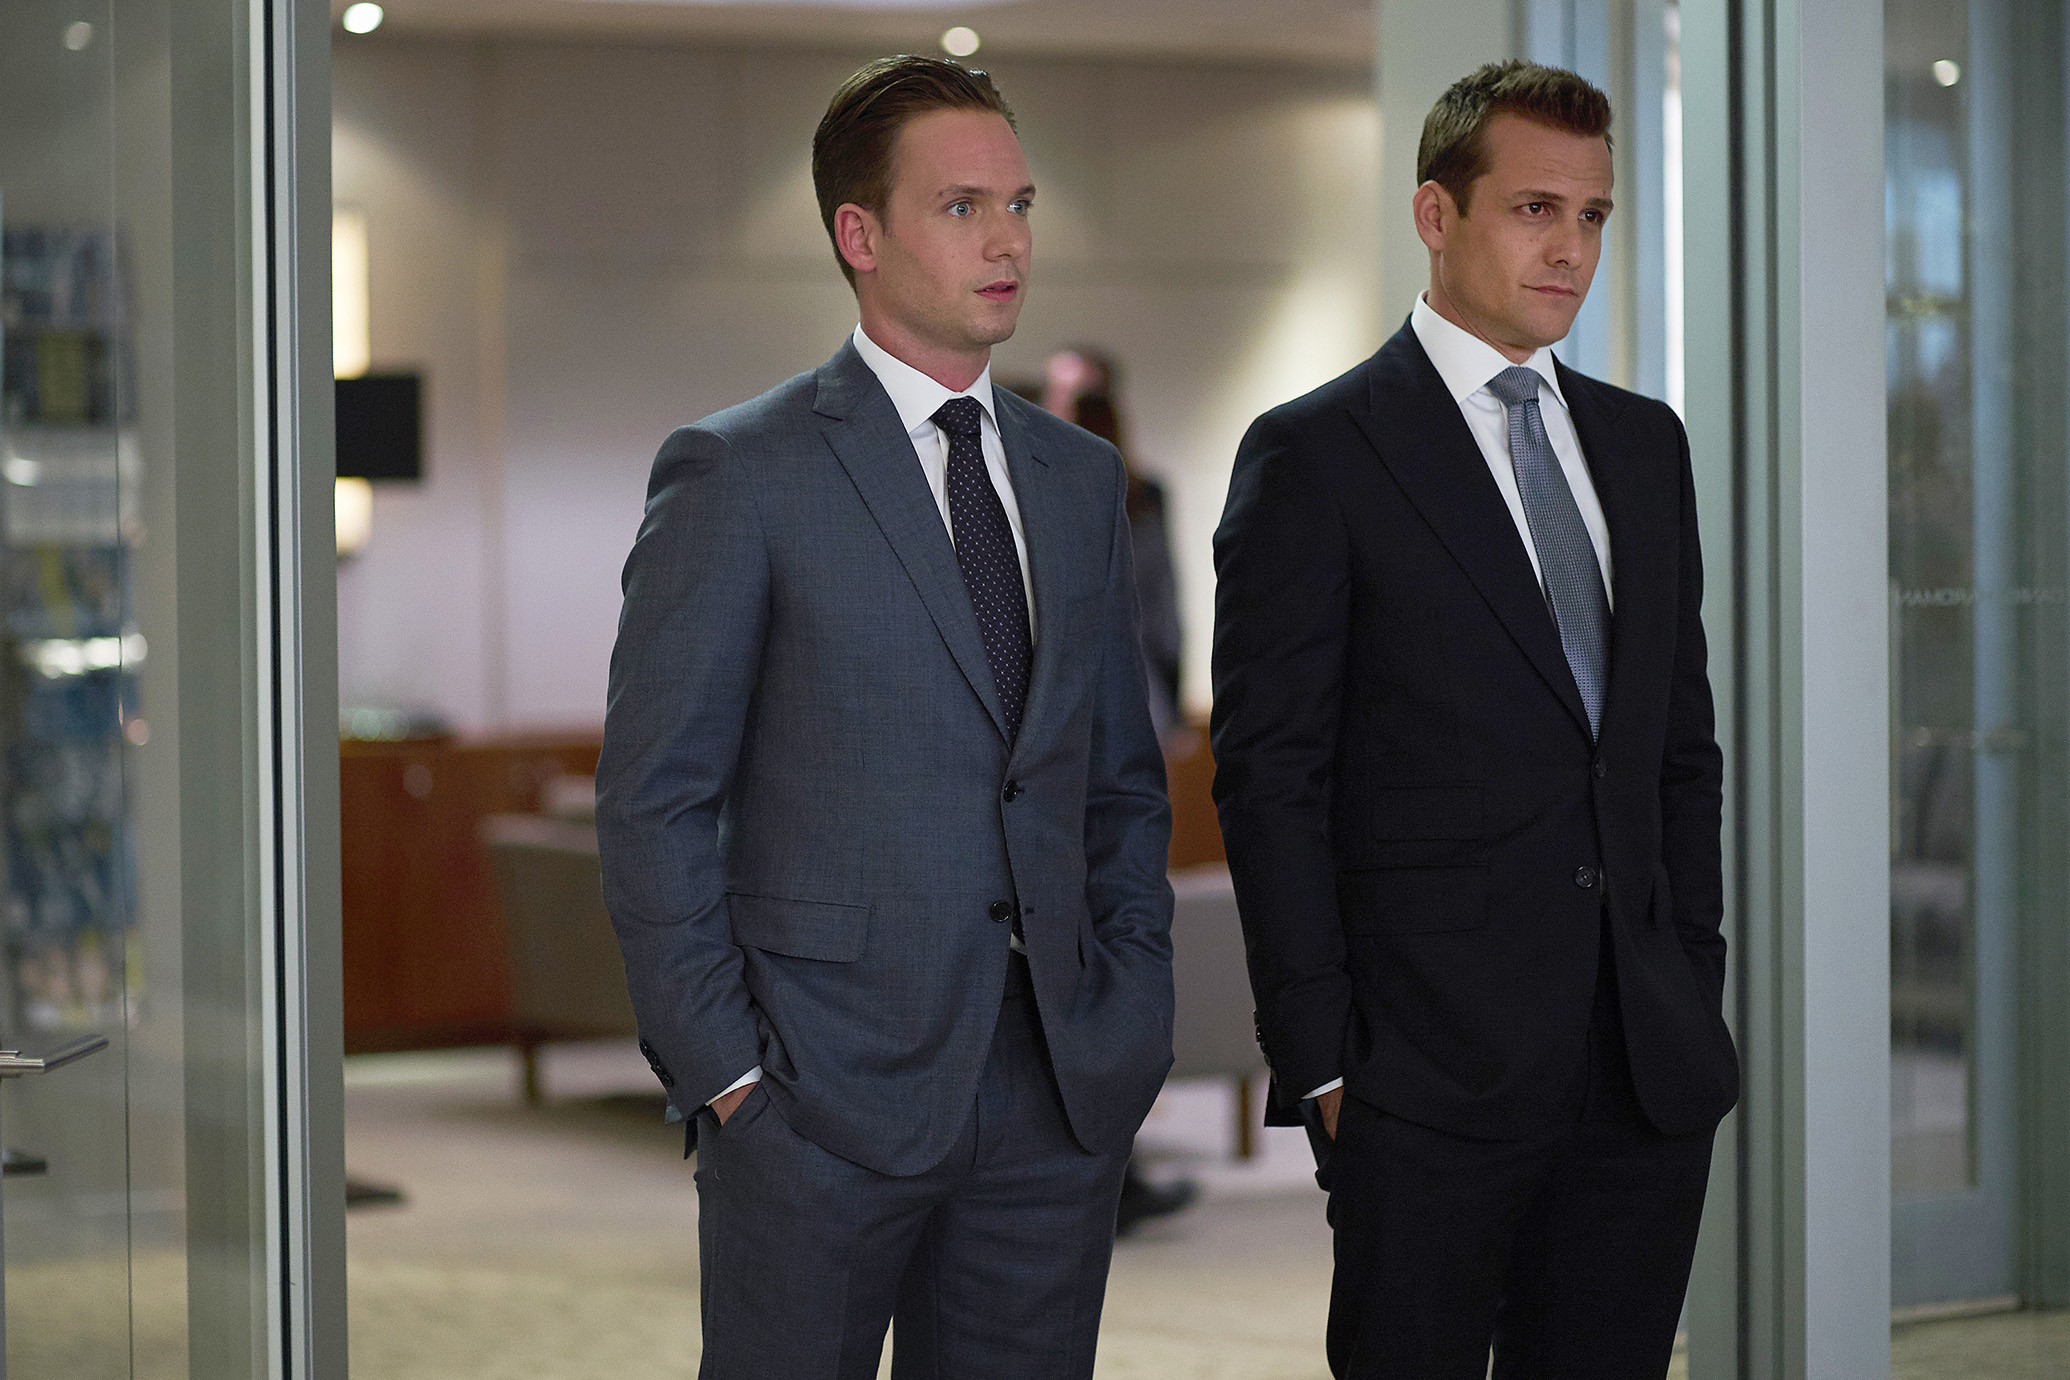 Suits executive producer Aaron Korsh shares what's next after the game...